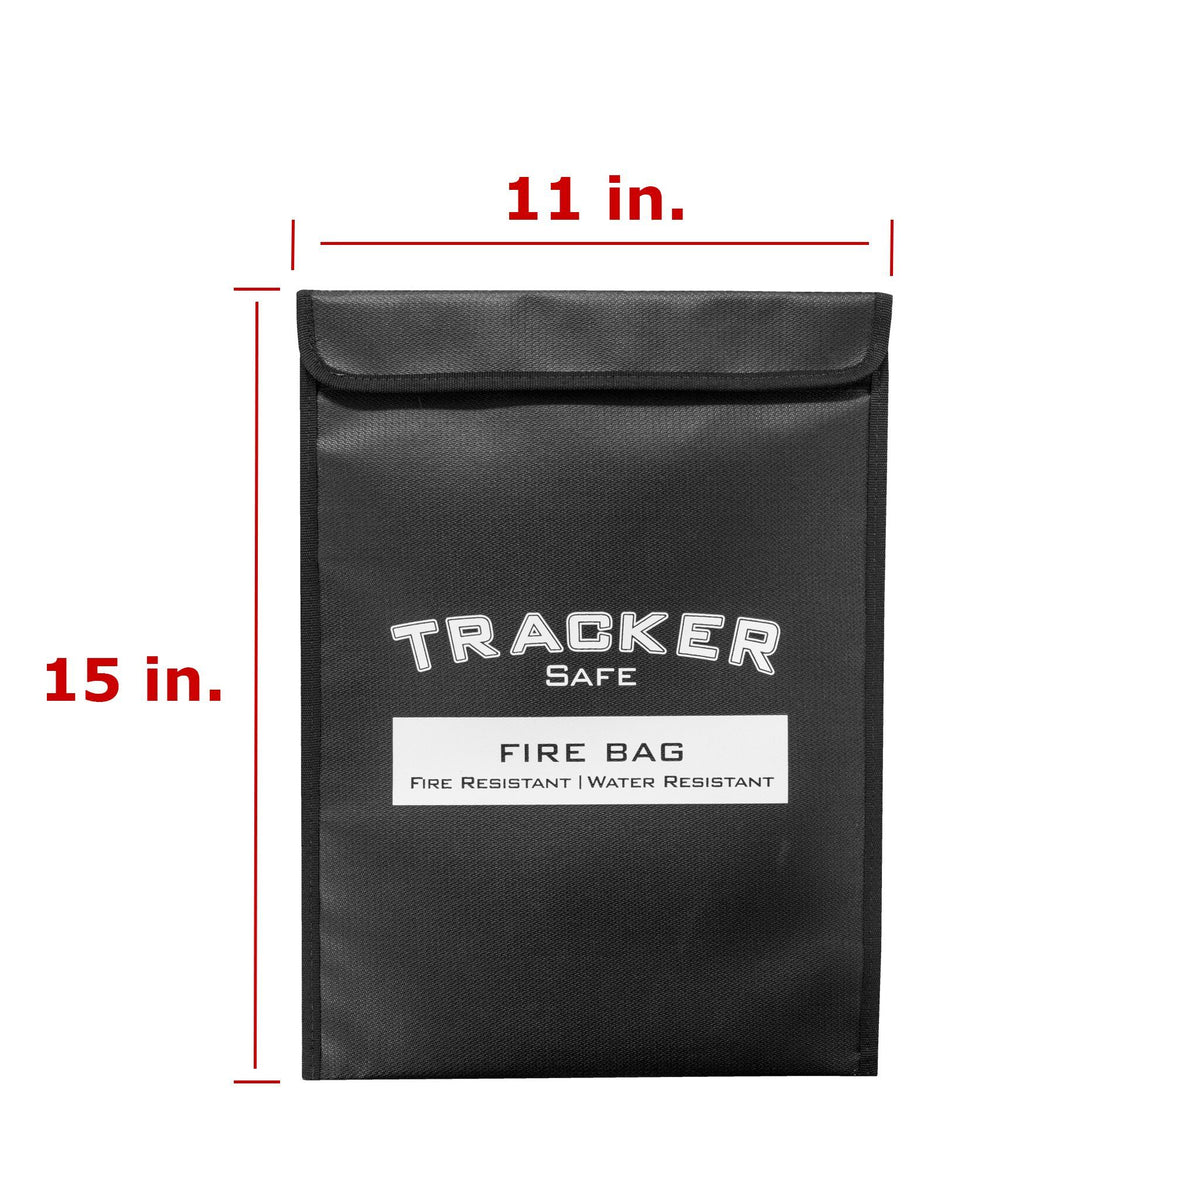 Tracker FB1511 Fire &amp; Water Resistant Bag Dimensions